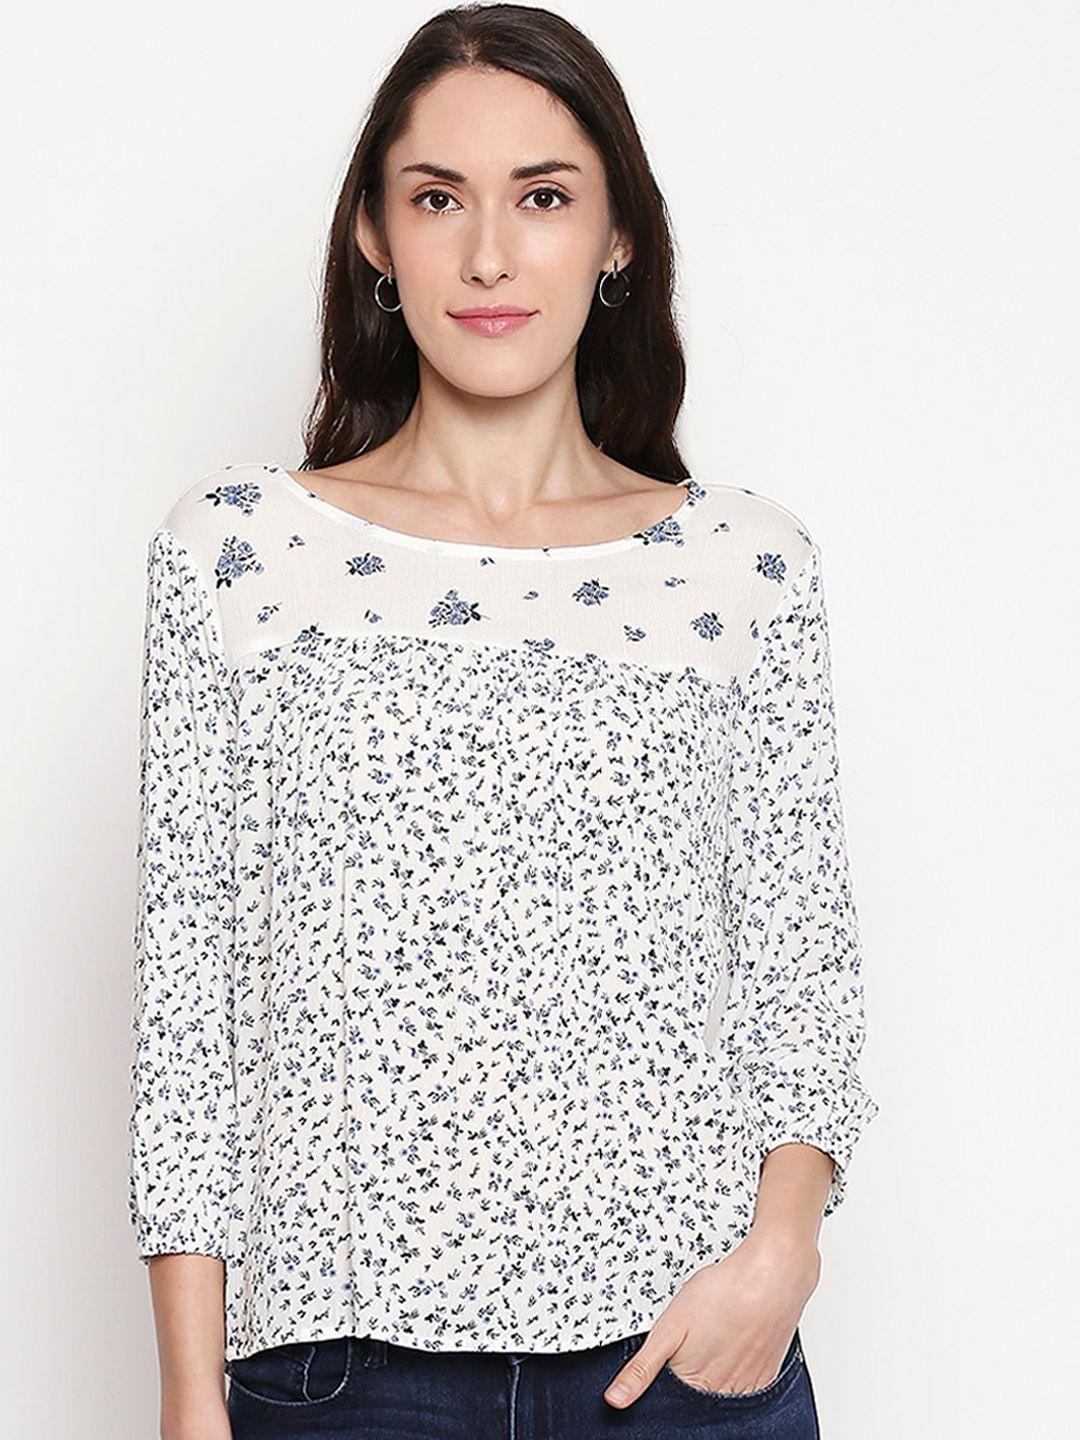 honey by pantaloons women white floral printed top